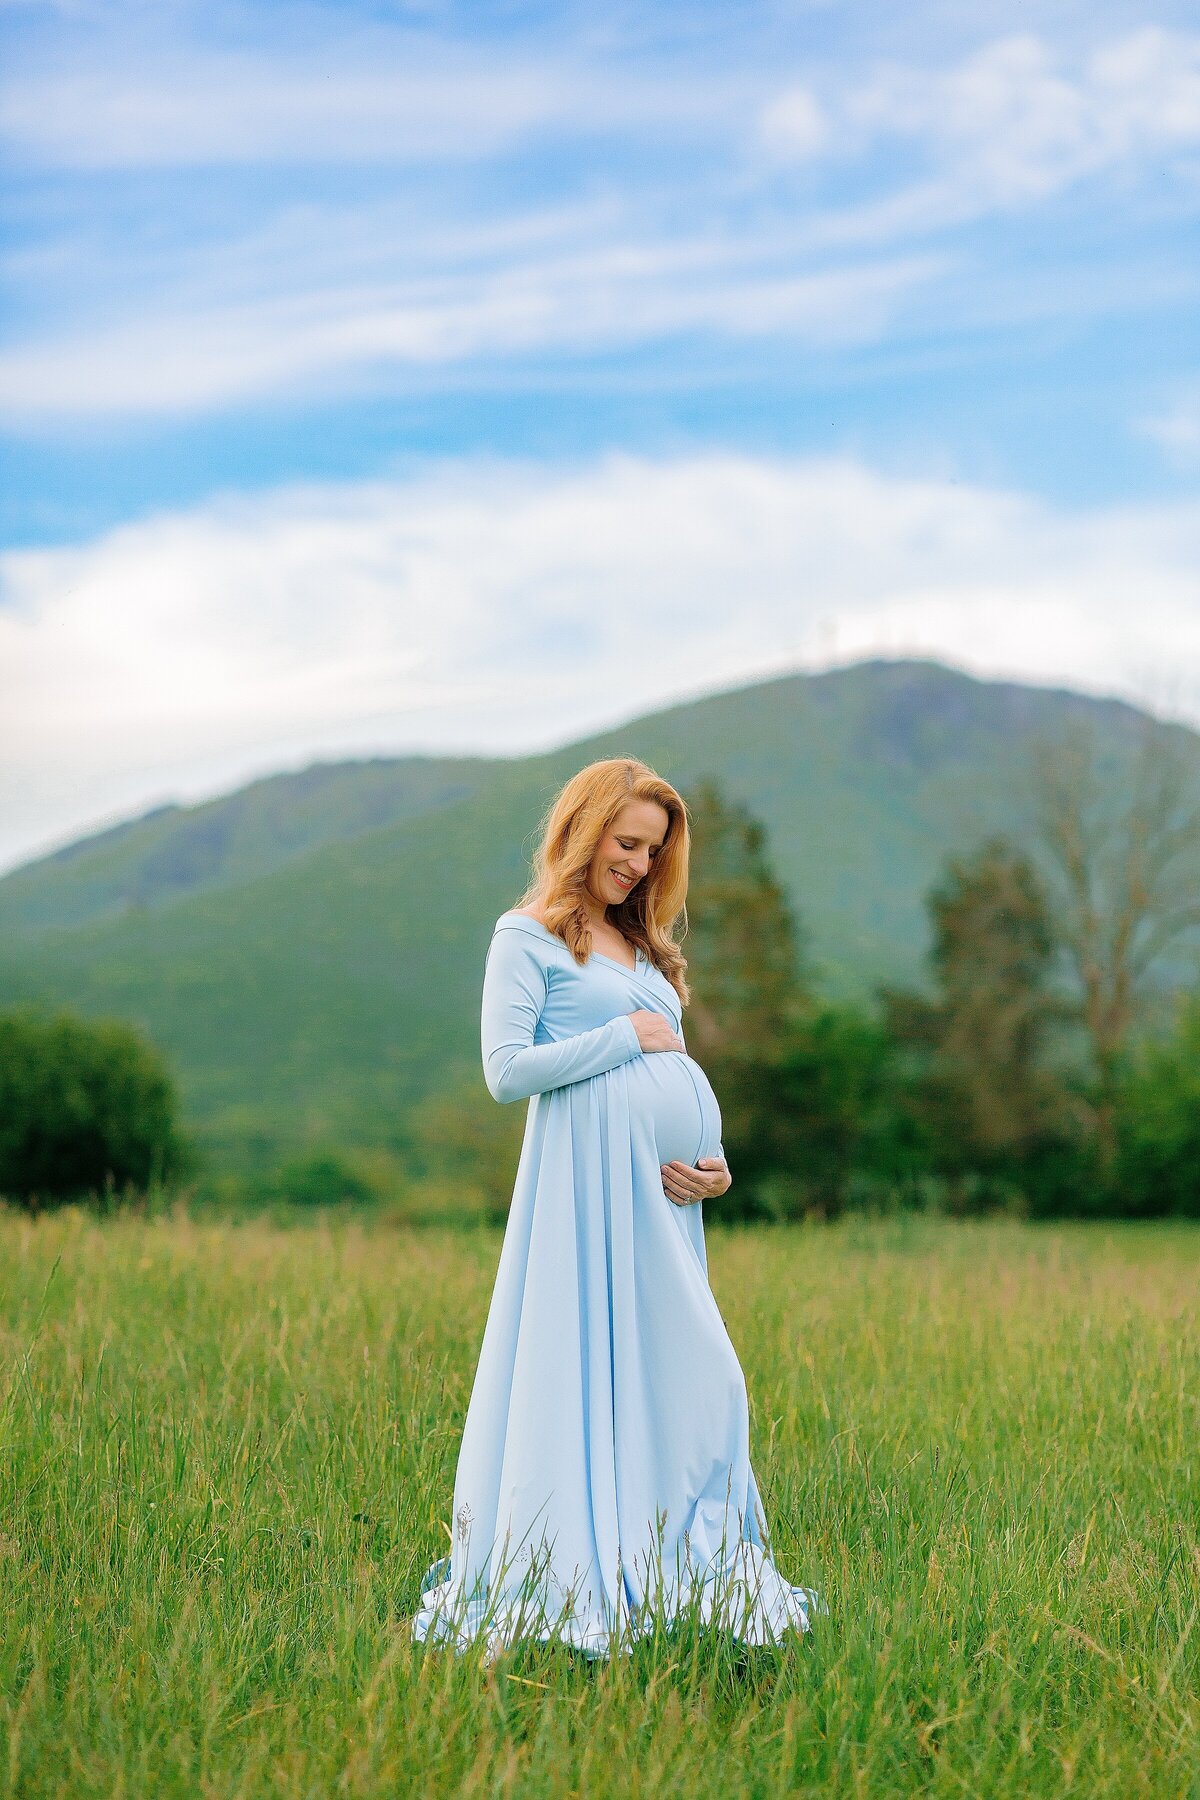 Mom to be wearing blue dress with mountains in the background